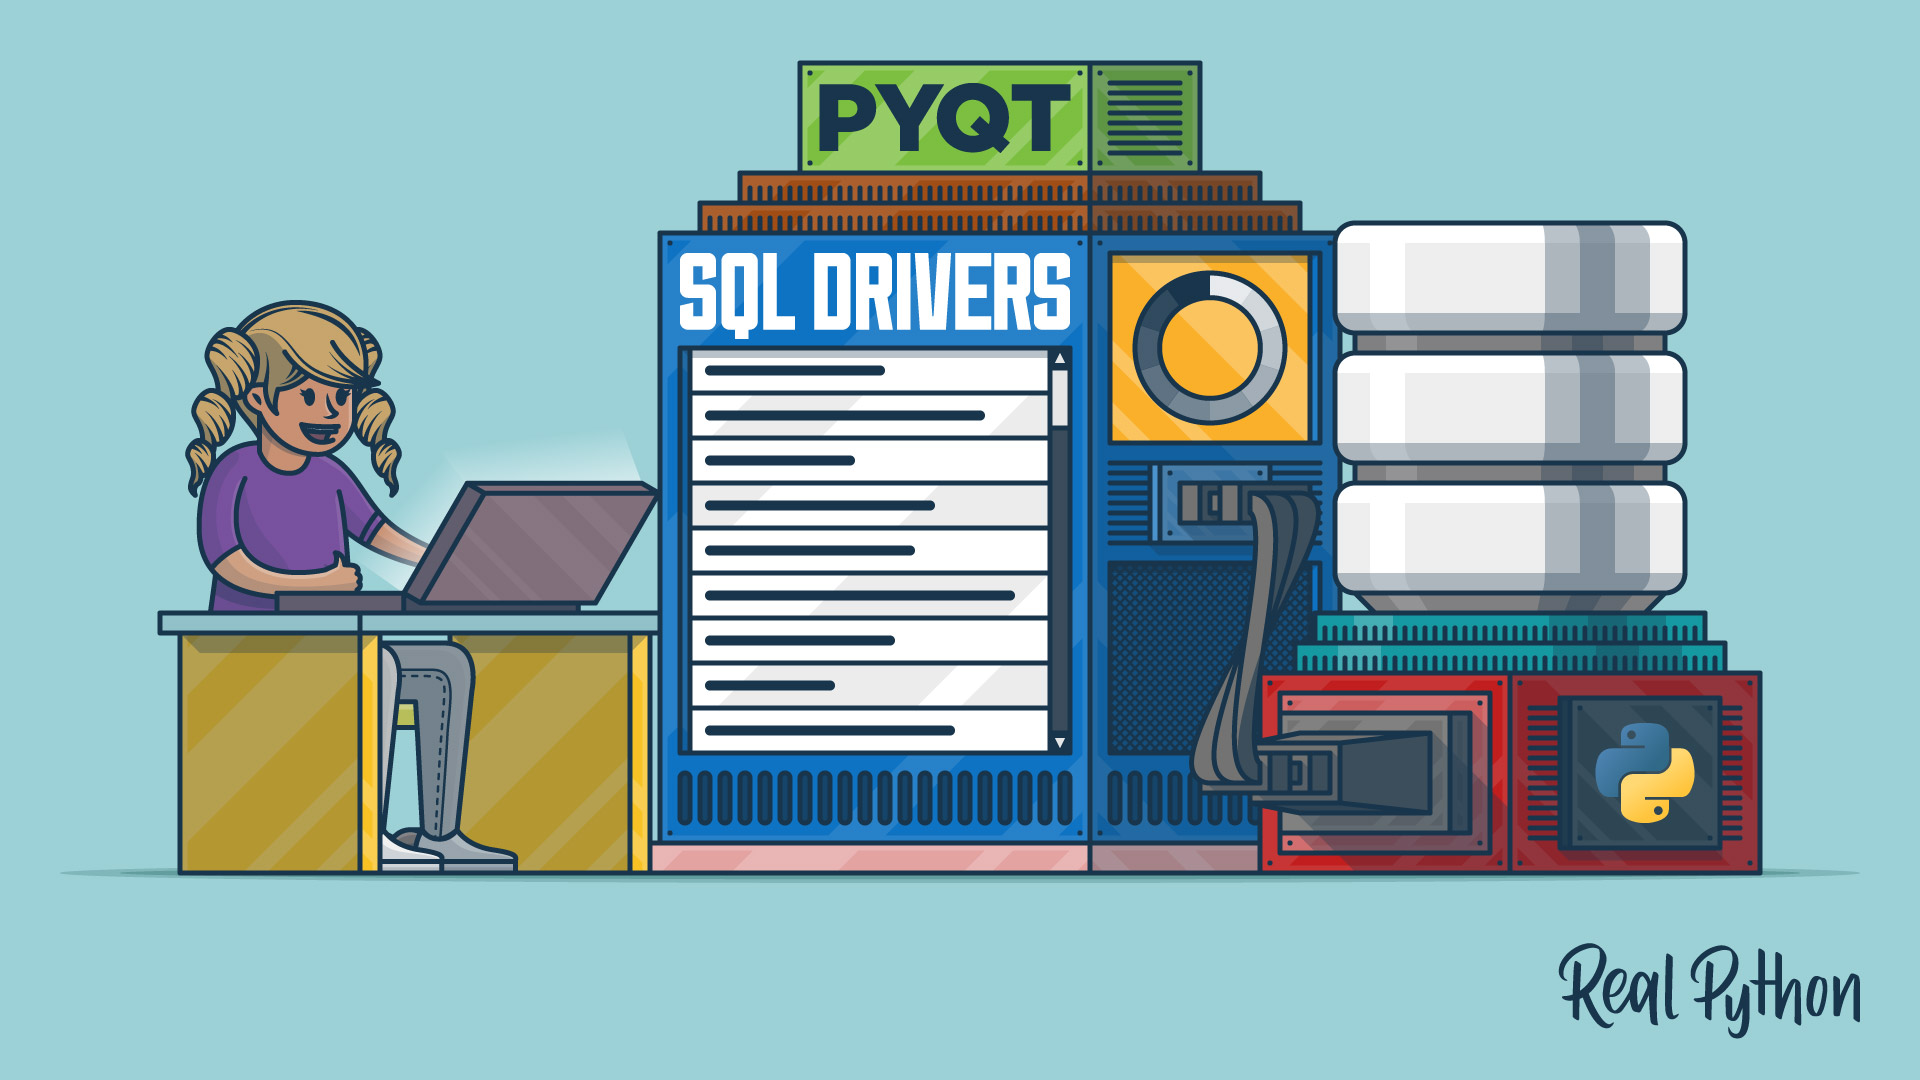 "Handling SQL Databases With PyQt: The Basics"